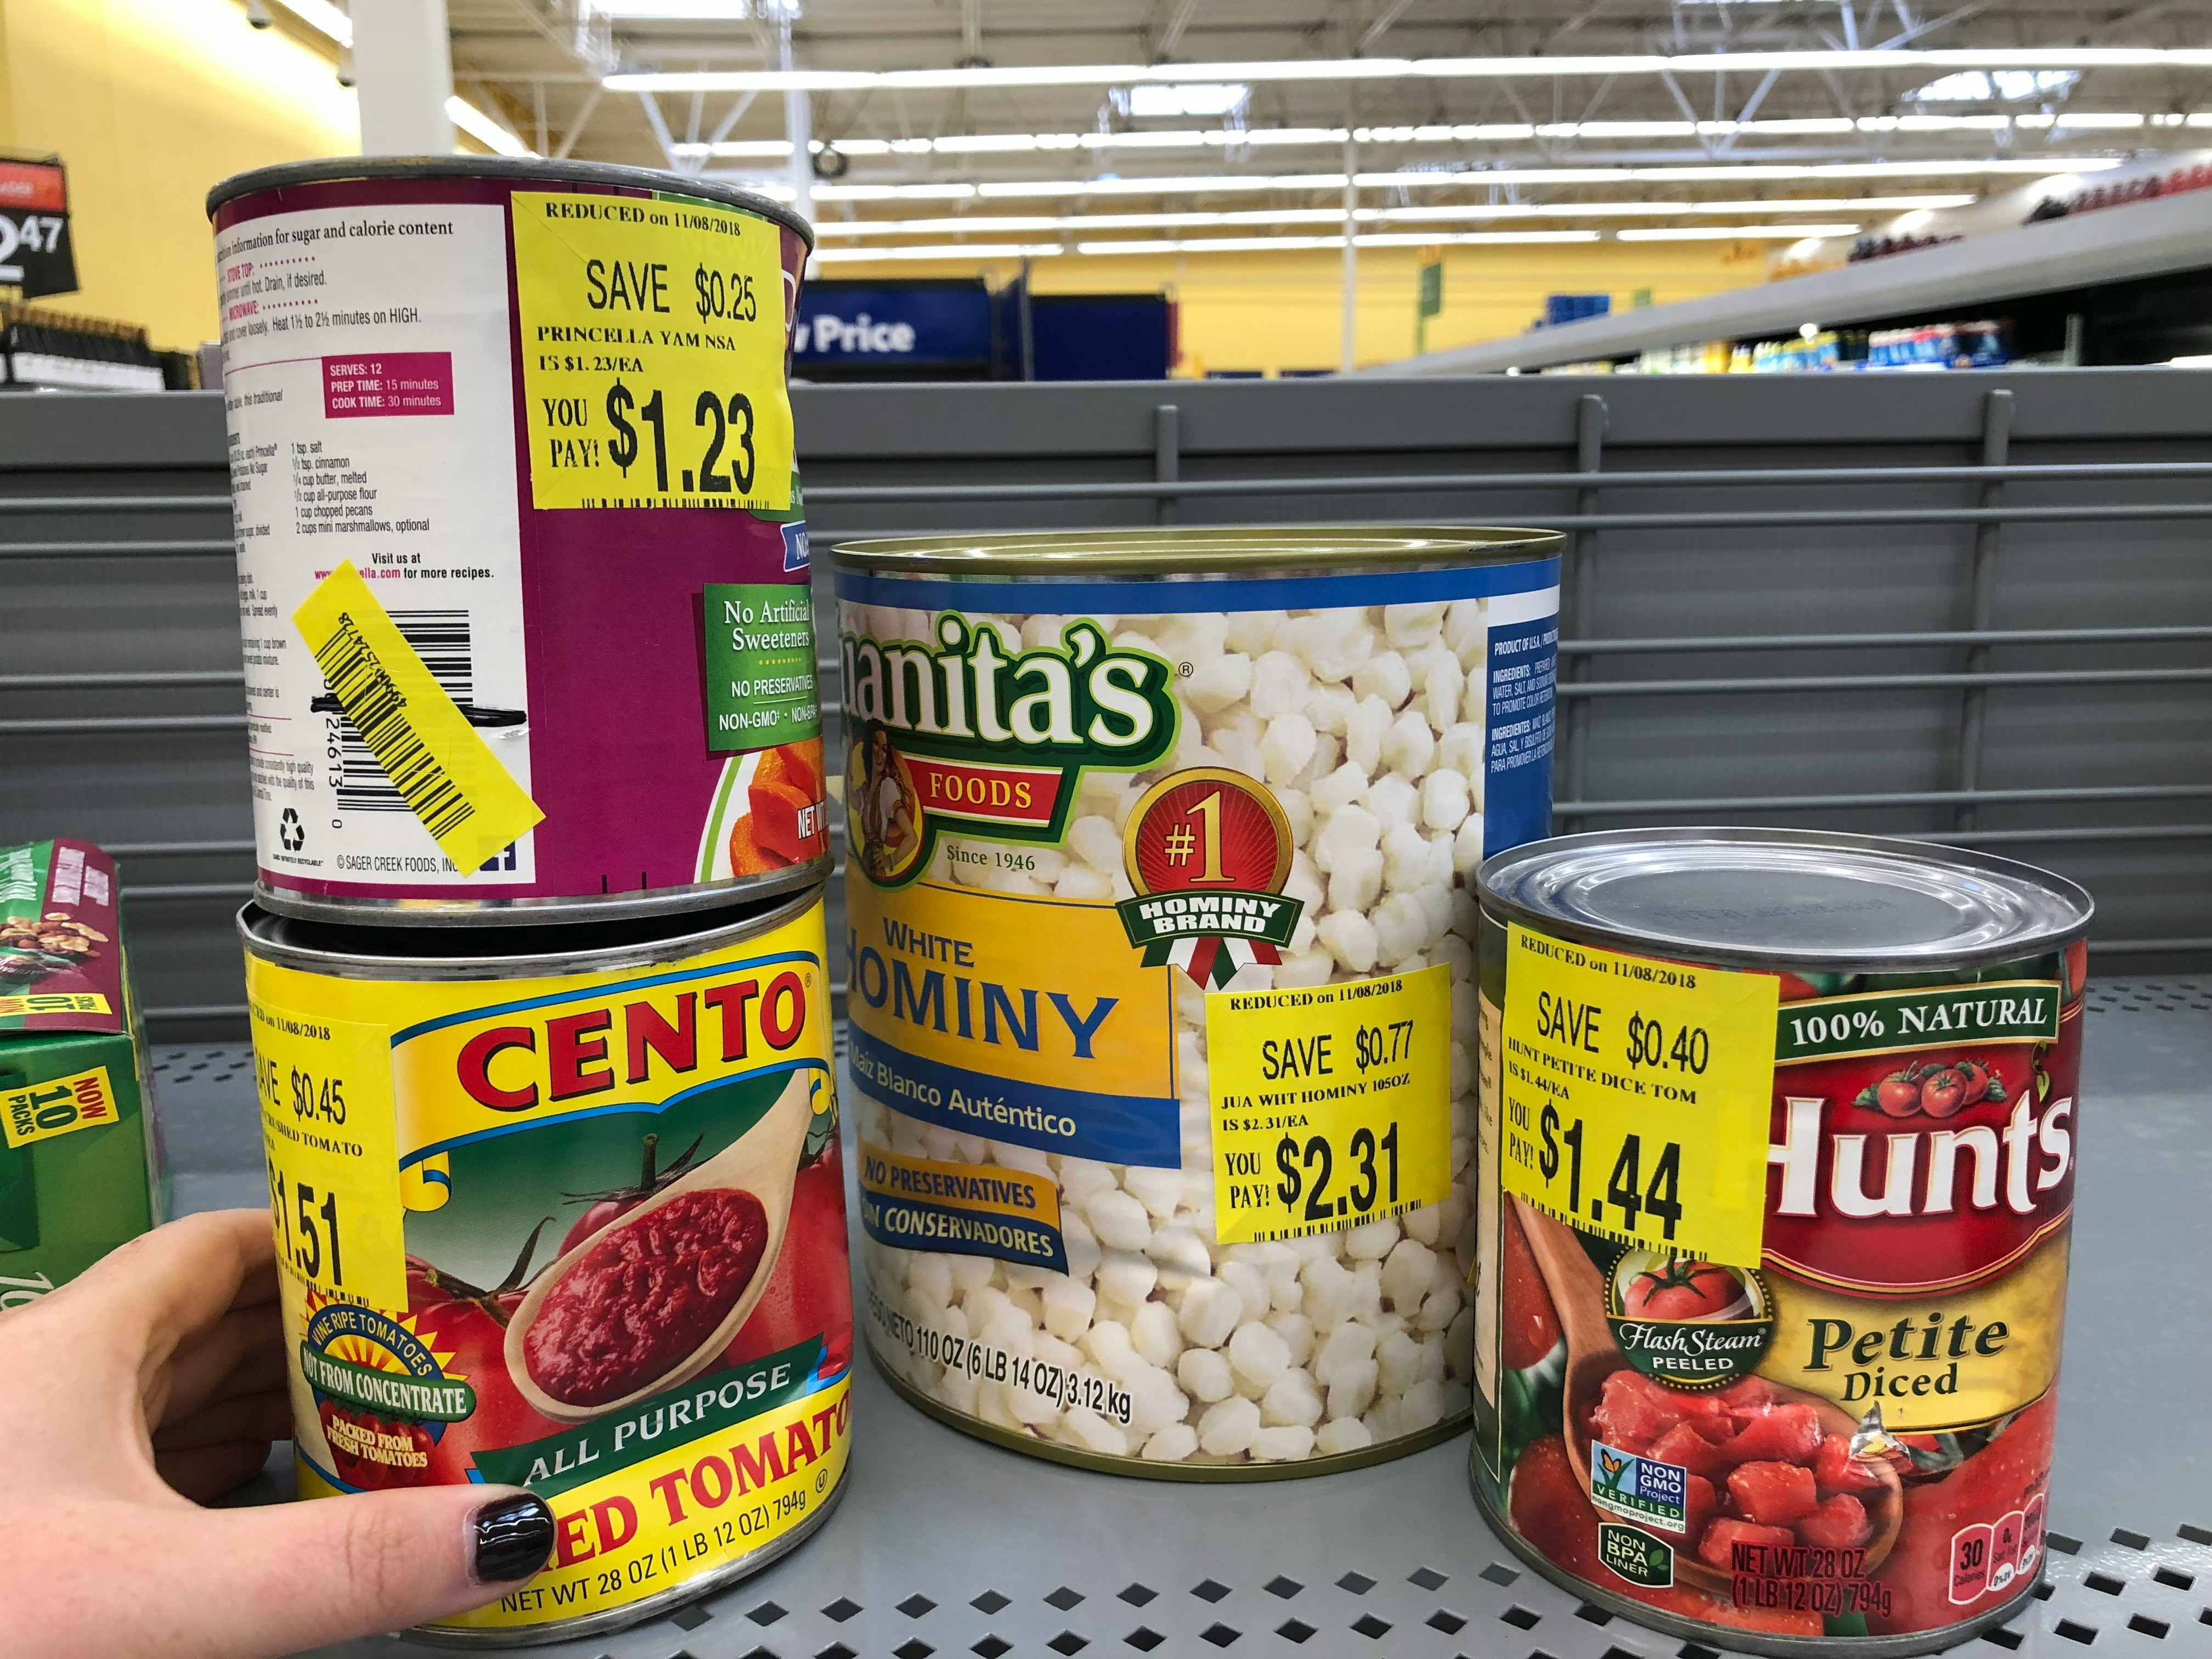 https://prod-cdn-thekrazycouponlady.imgix.net/wp-content/uploads/2019/01/walmart-dented-cans-1548088337.jpg?auto=format&fit=fill&q=25